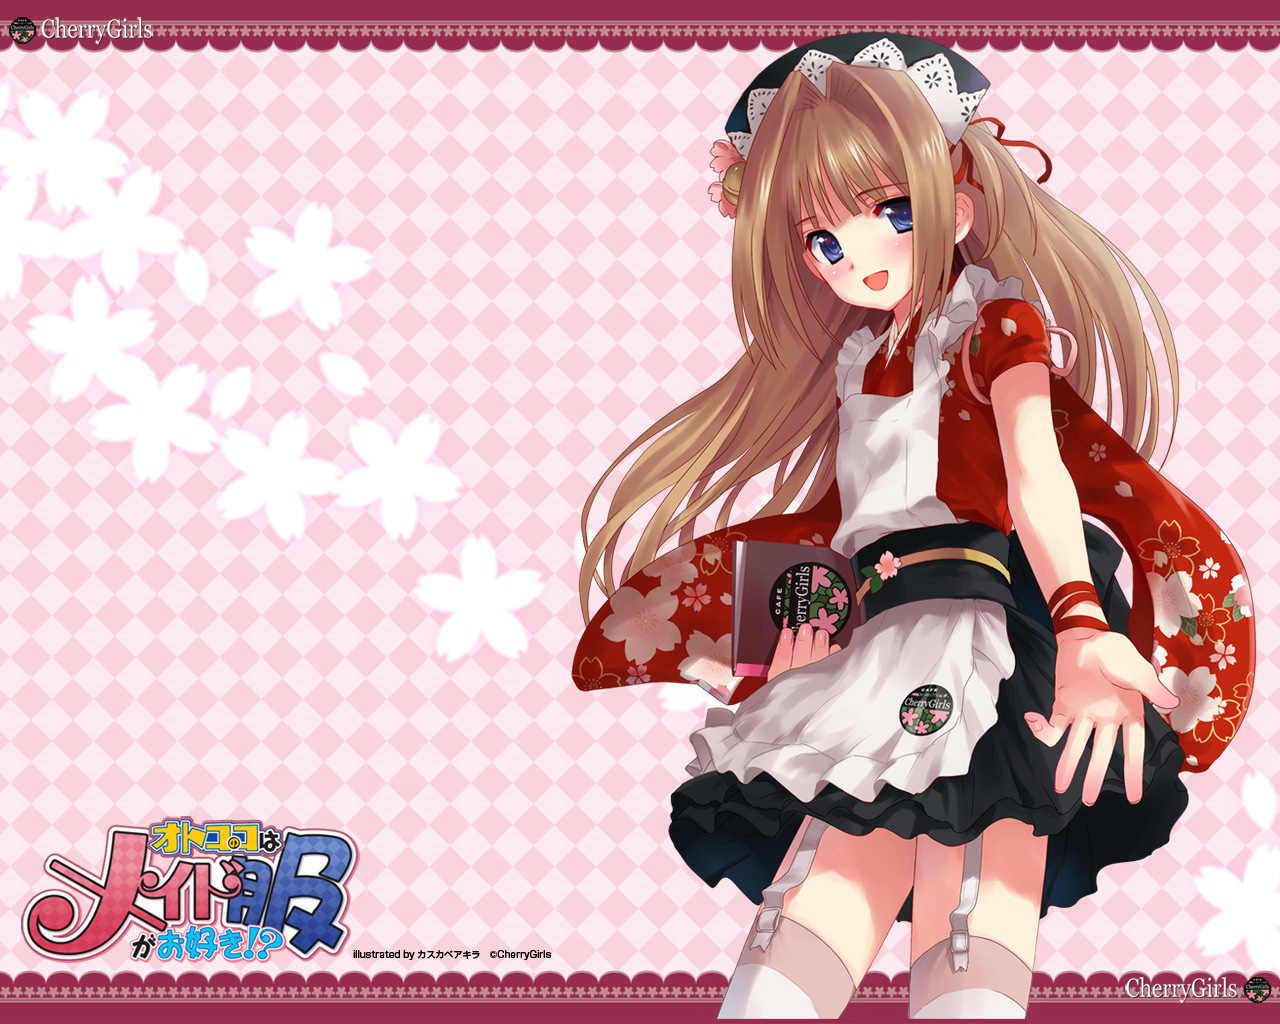 HQ Cherry Girls Wallpapers | File 496.33Kb